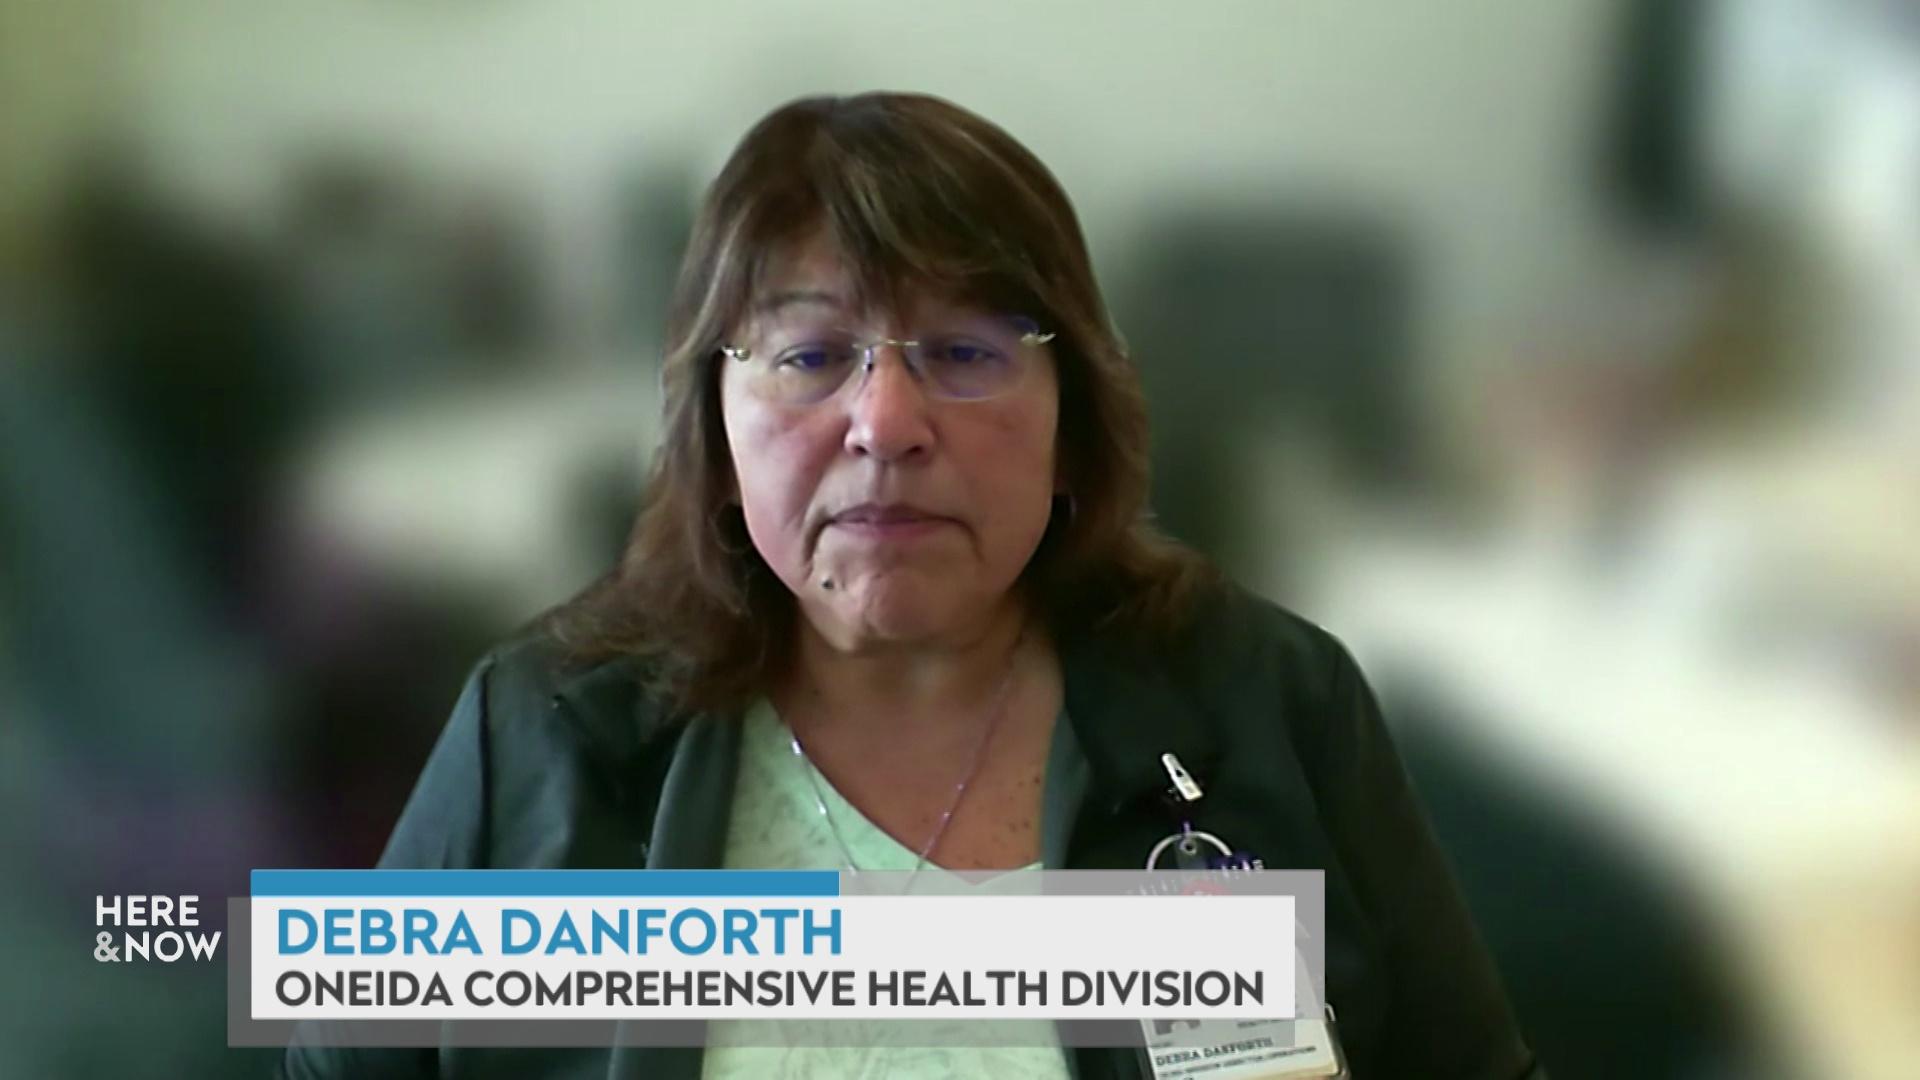 A still image from a video shows Debra Danforth sitting in front of a blurred background with a graphic at bottom reading 'Debra Danforth' and 'Oneida Comprehensive Health Division.'